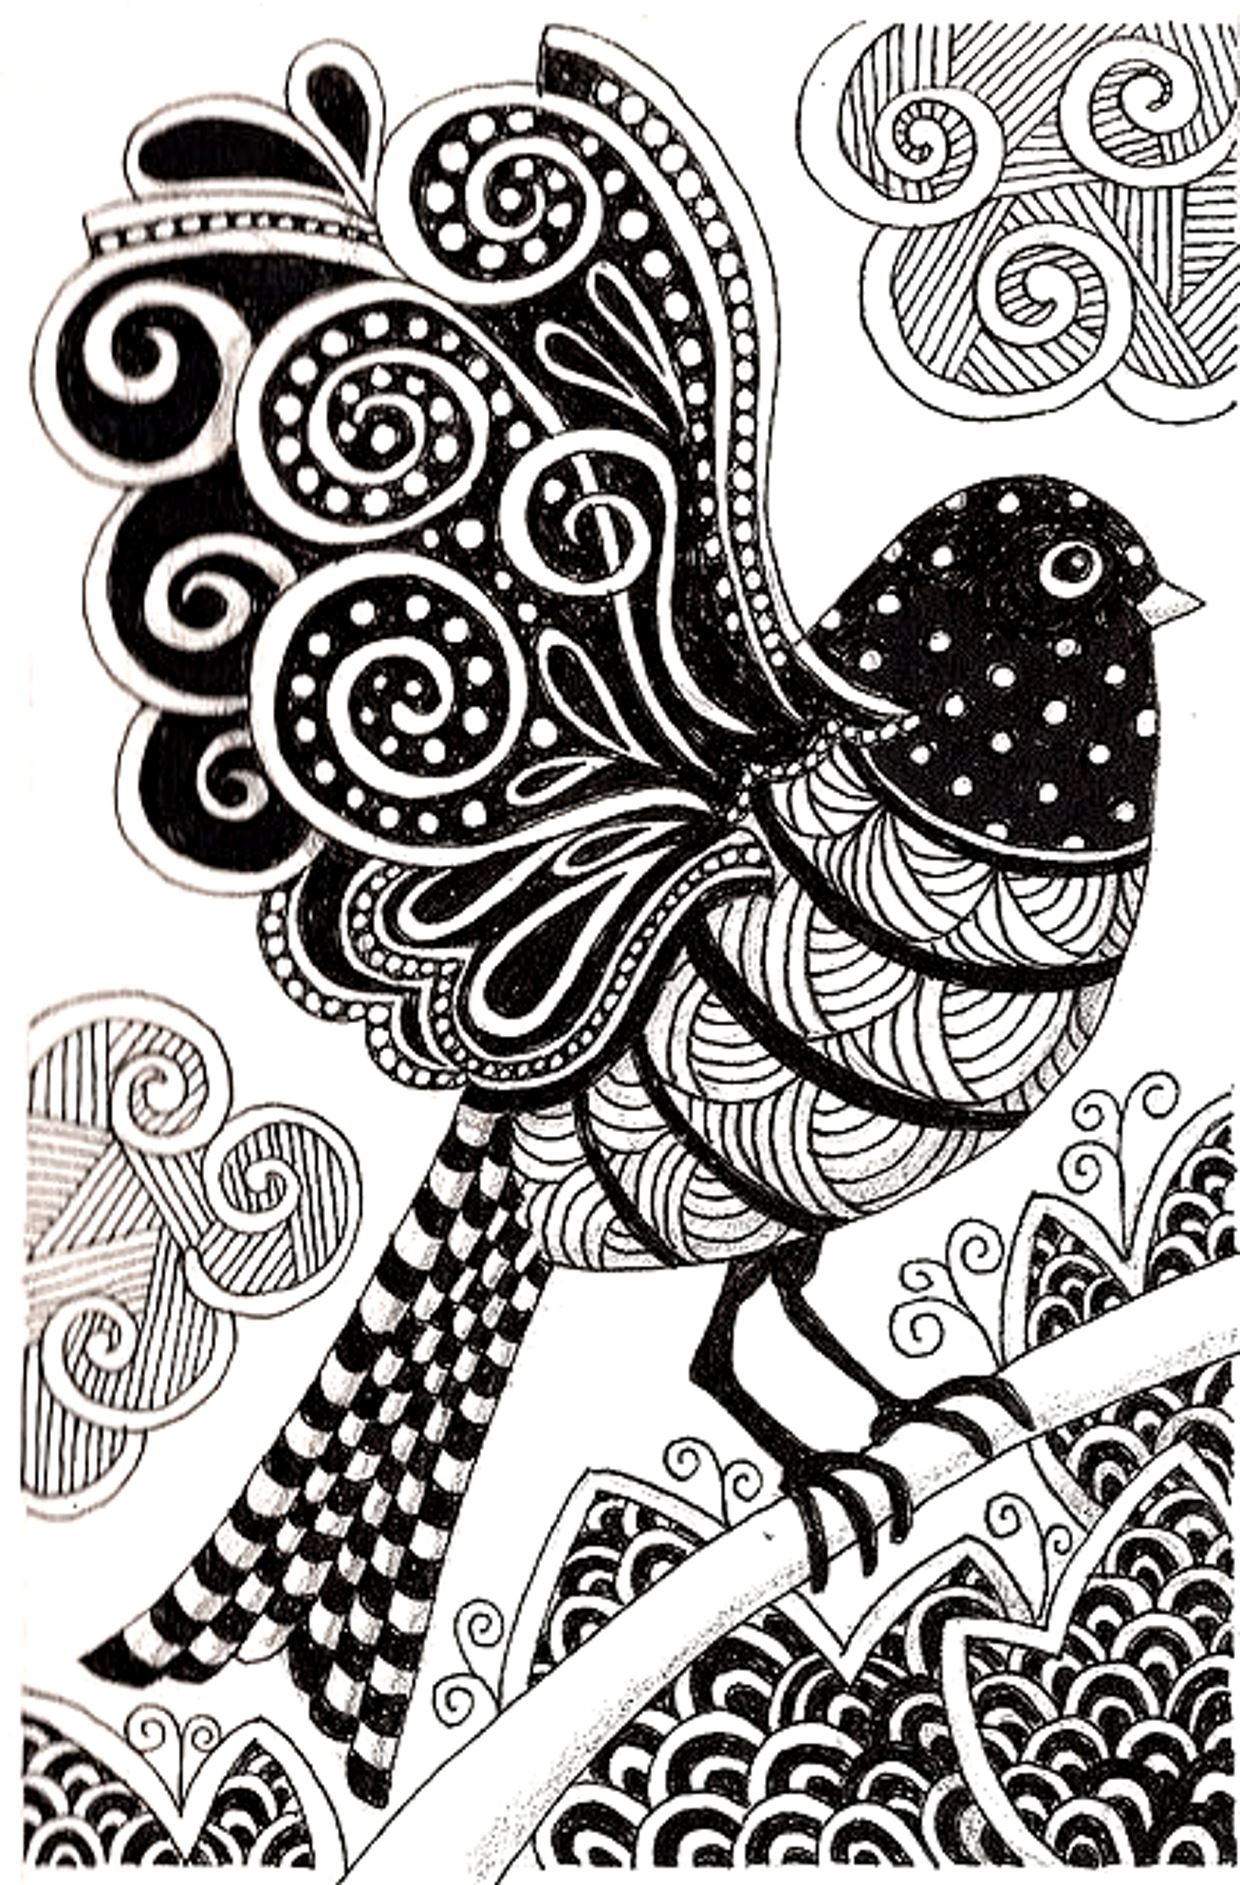 Dark bird drawing, with simple Zentangle patterns